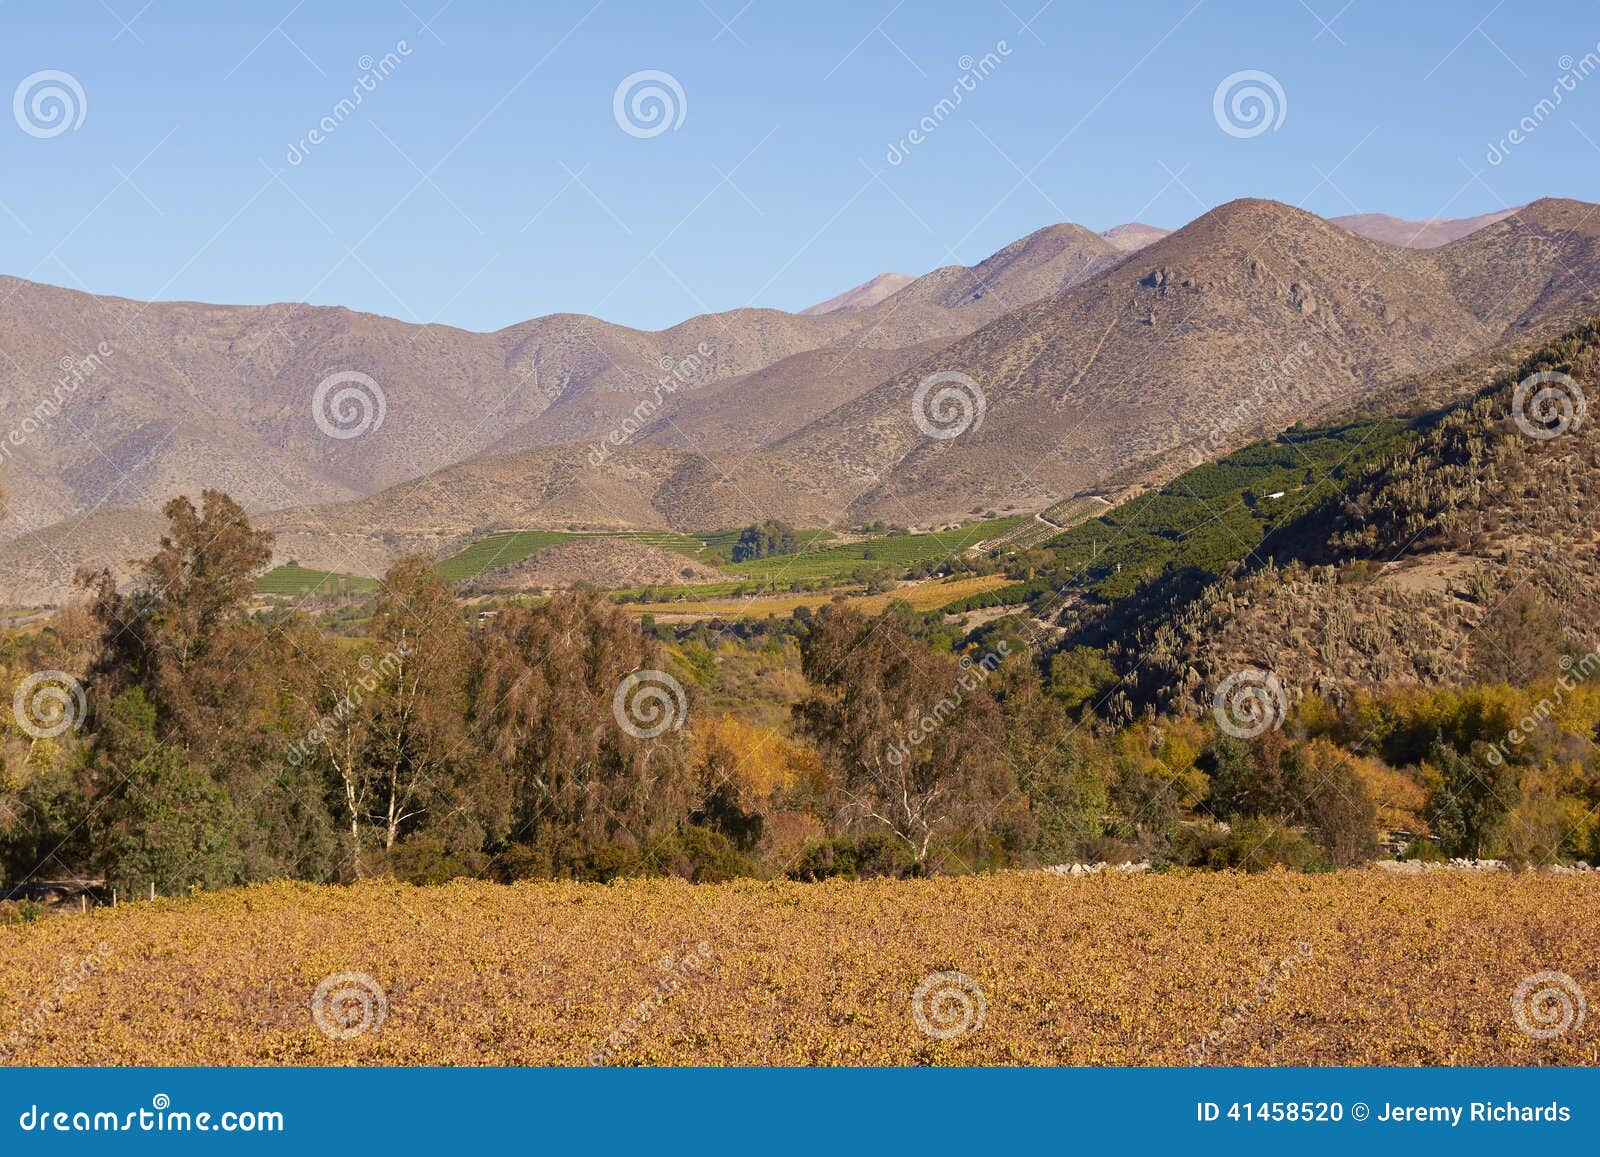 vineyards of chile